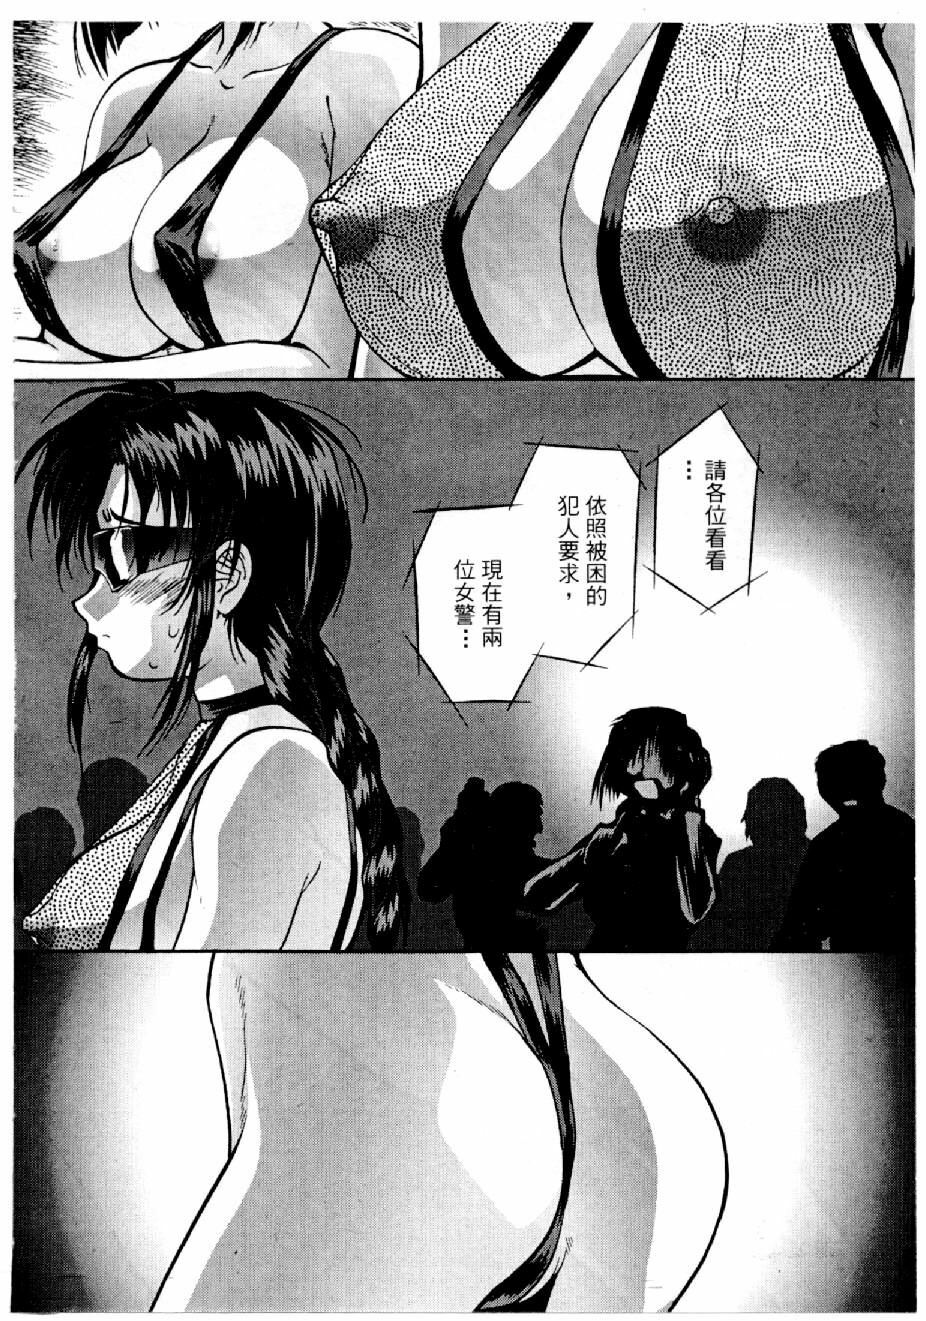 [Mizuno Kei] Cutie Police Woman 2 (You're Under Arrest) [Chinese] page 9 full